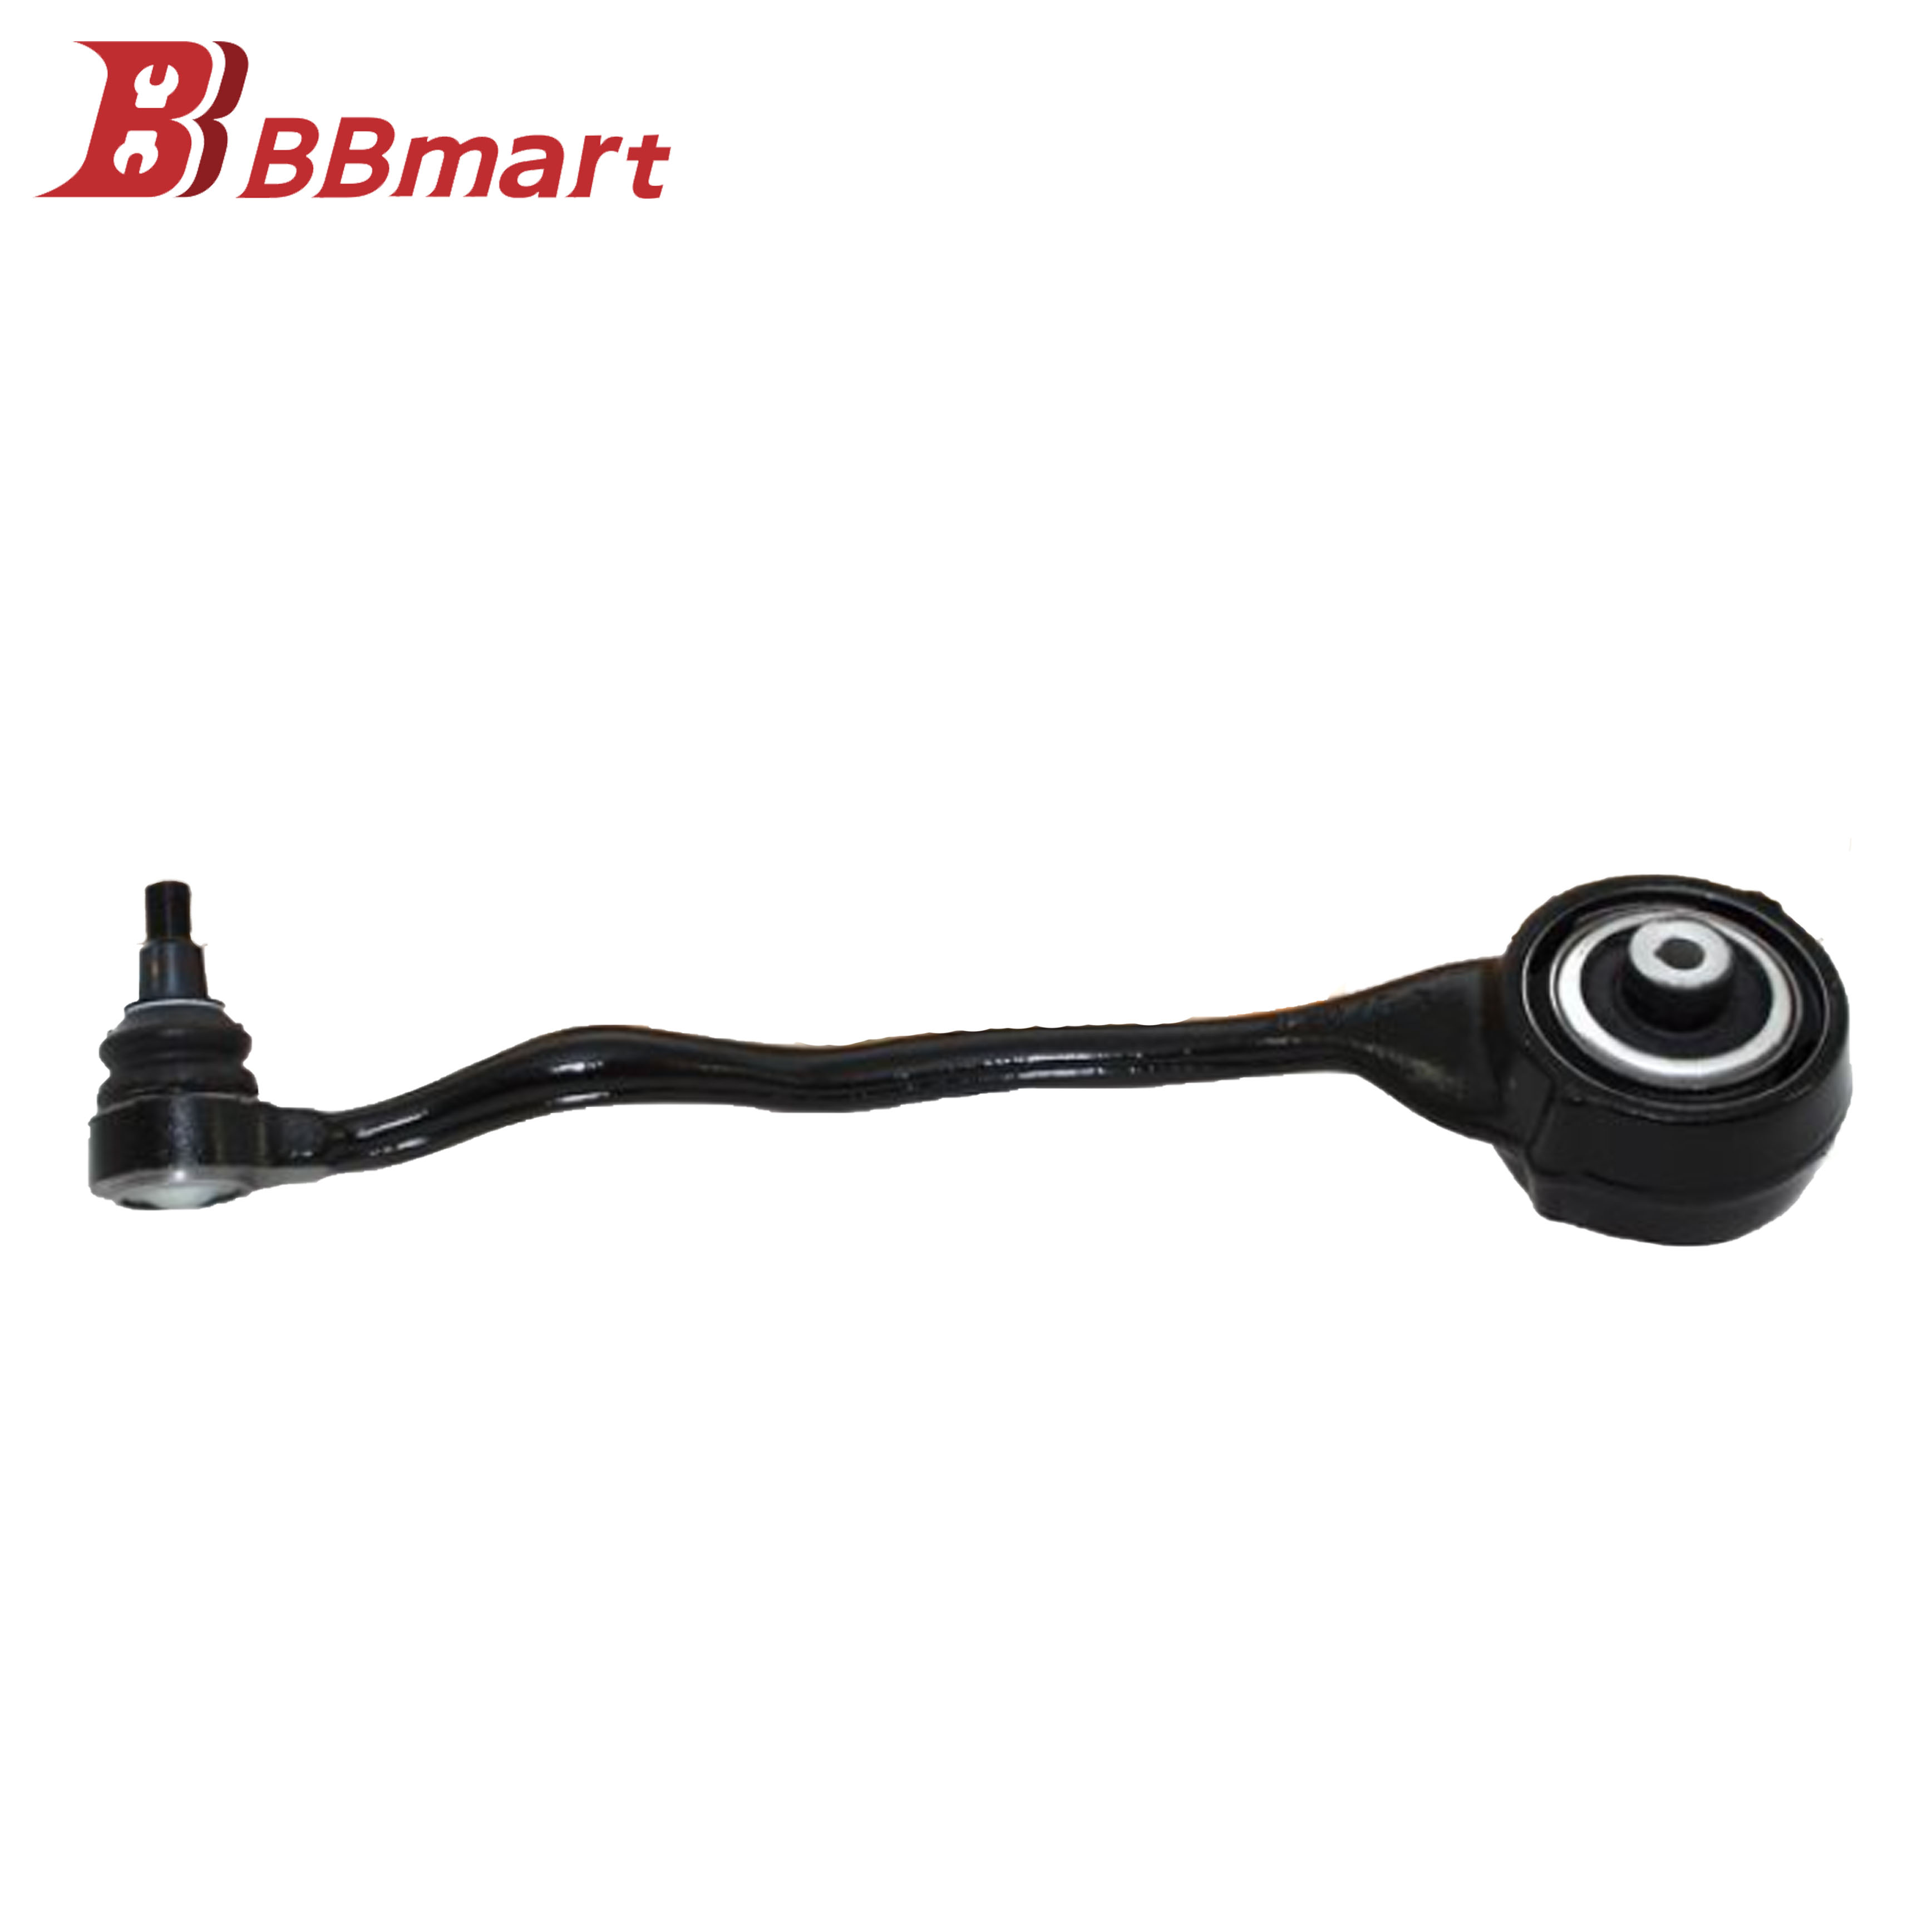 BBmart Auto Parts Front Lower Left Control Arm For Land Rover Range Rover Discovery OE LR113307